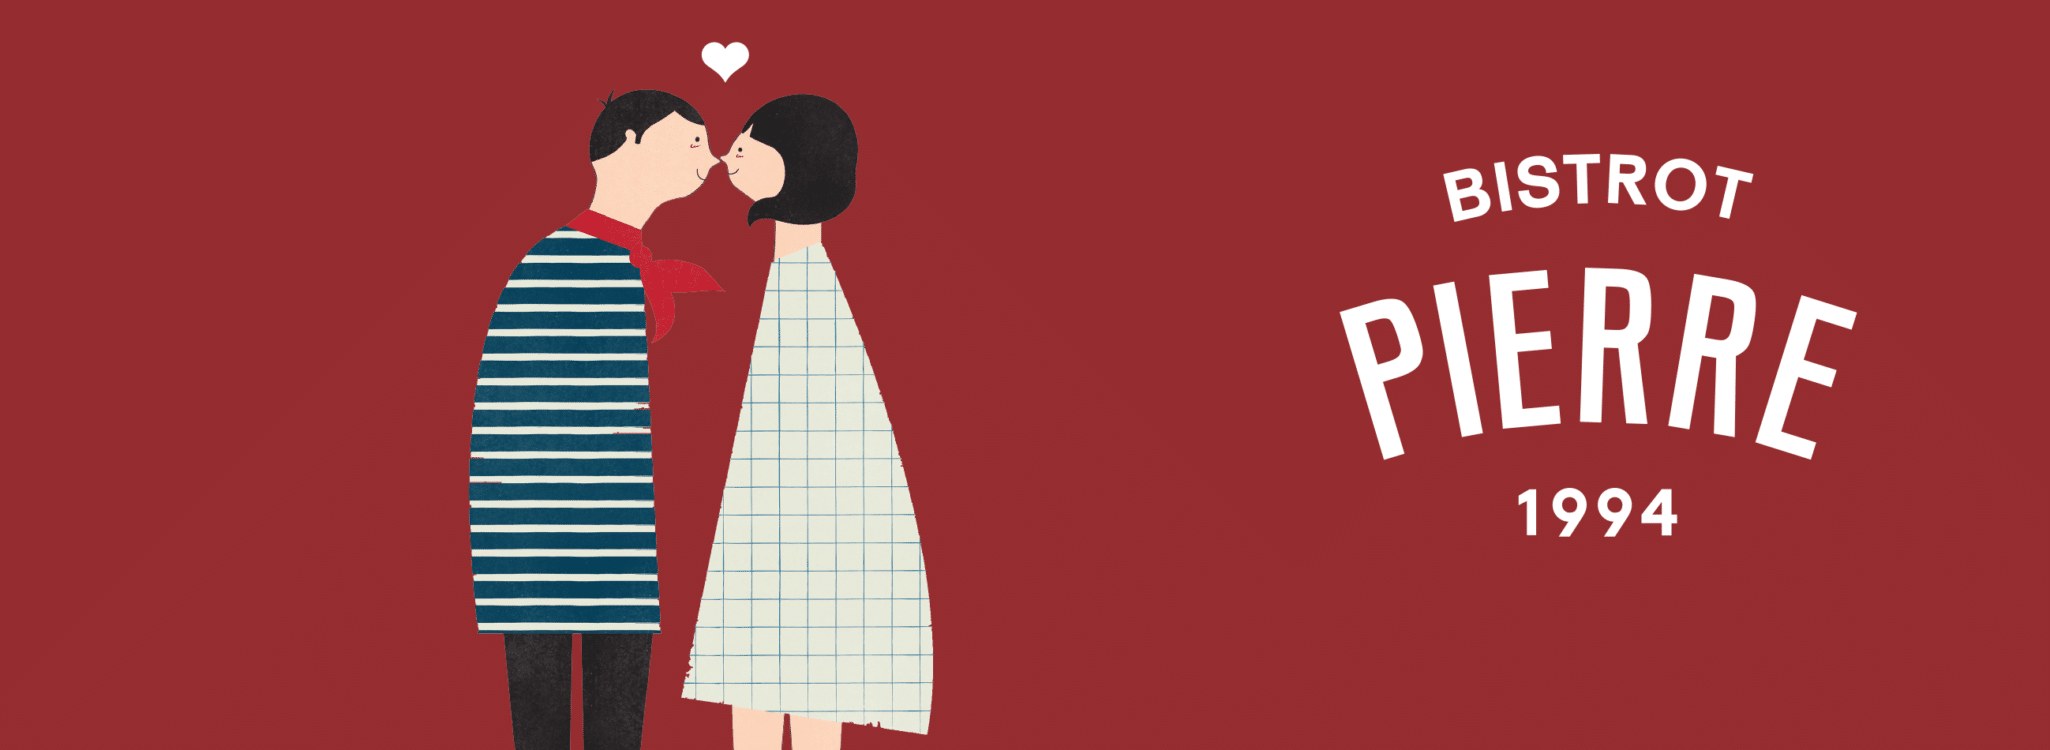 Bistrot Pierre — Valentine’s Day Campaign — Illustration of couple touching noses with love heart between their heads.